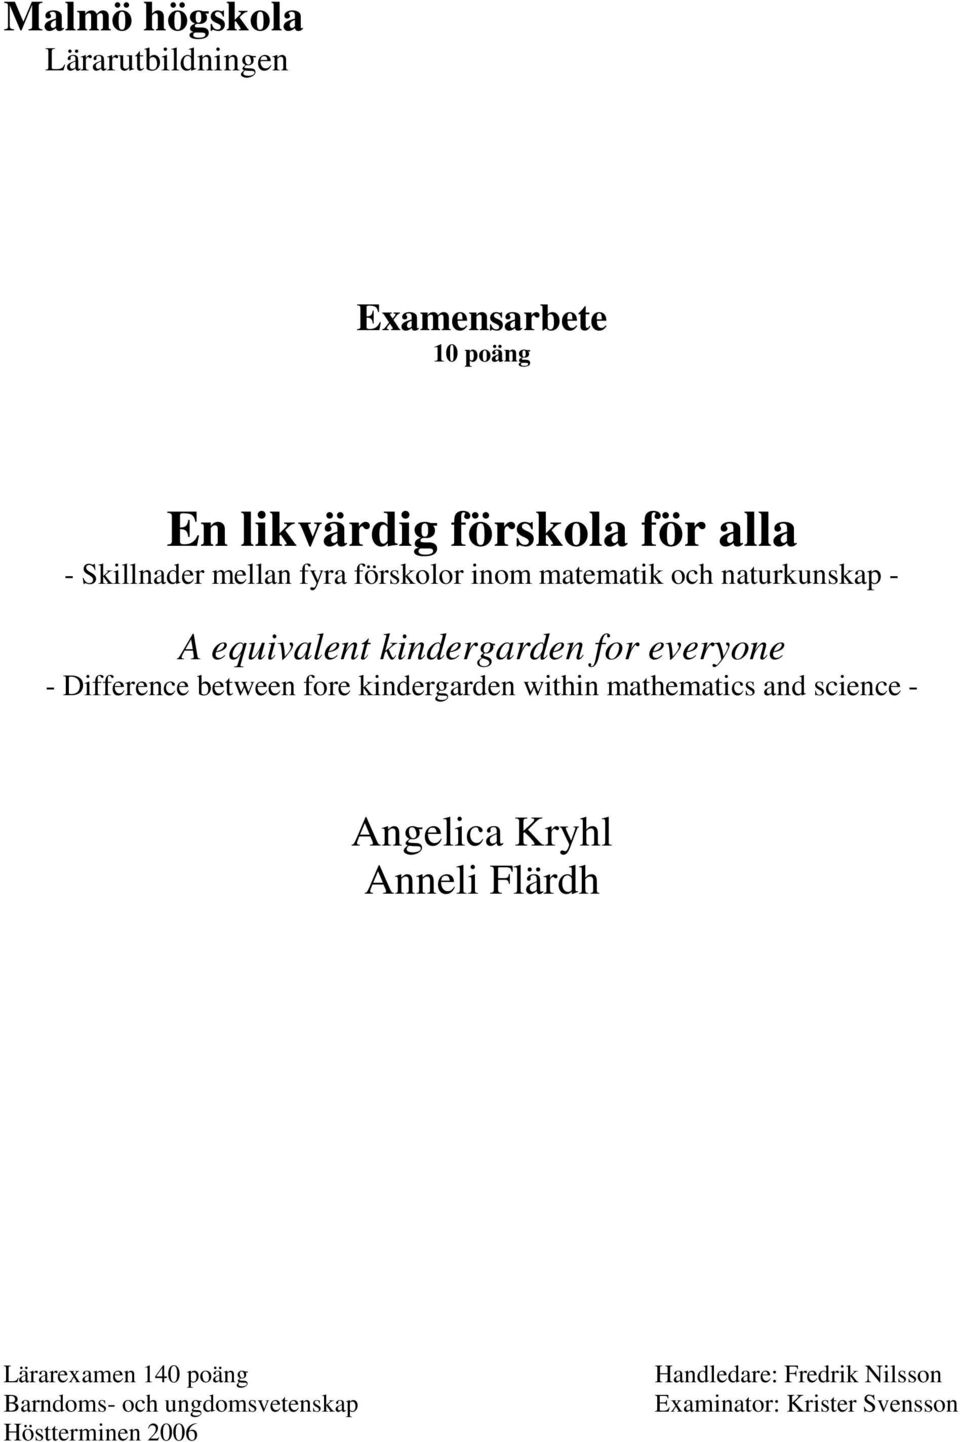 Difference between fore kindergarden within mathematics and science - Angelica Kryhl Anneli Flärdh